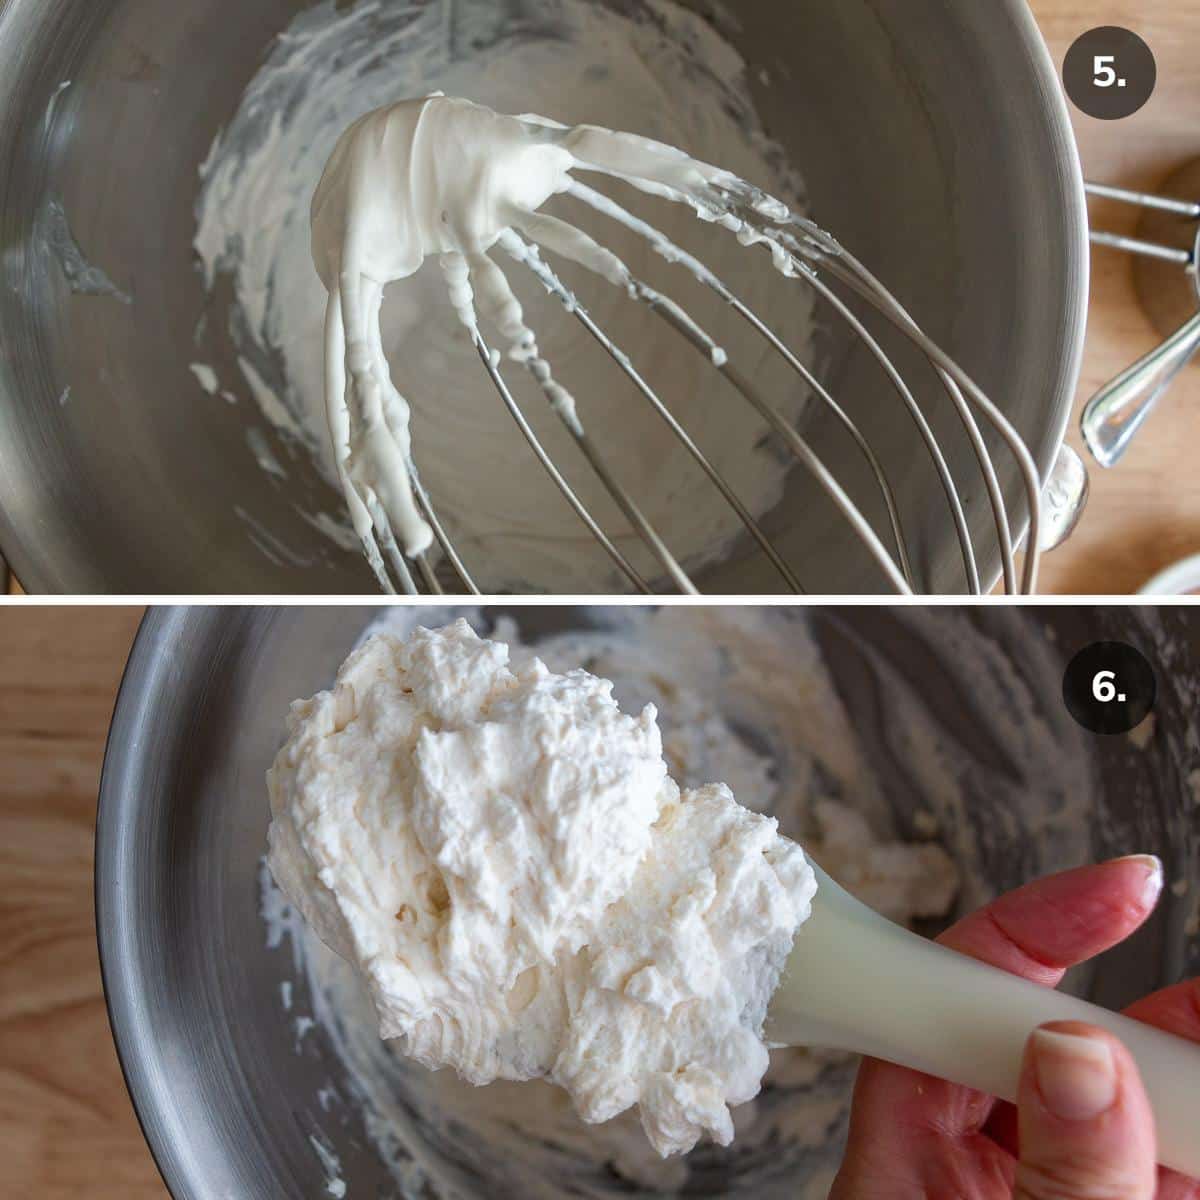 Whipped cream folded into no bake cream cheese filling mixture. 